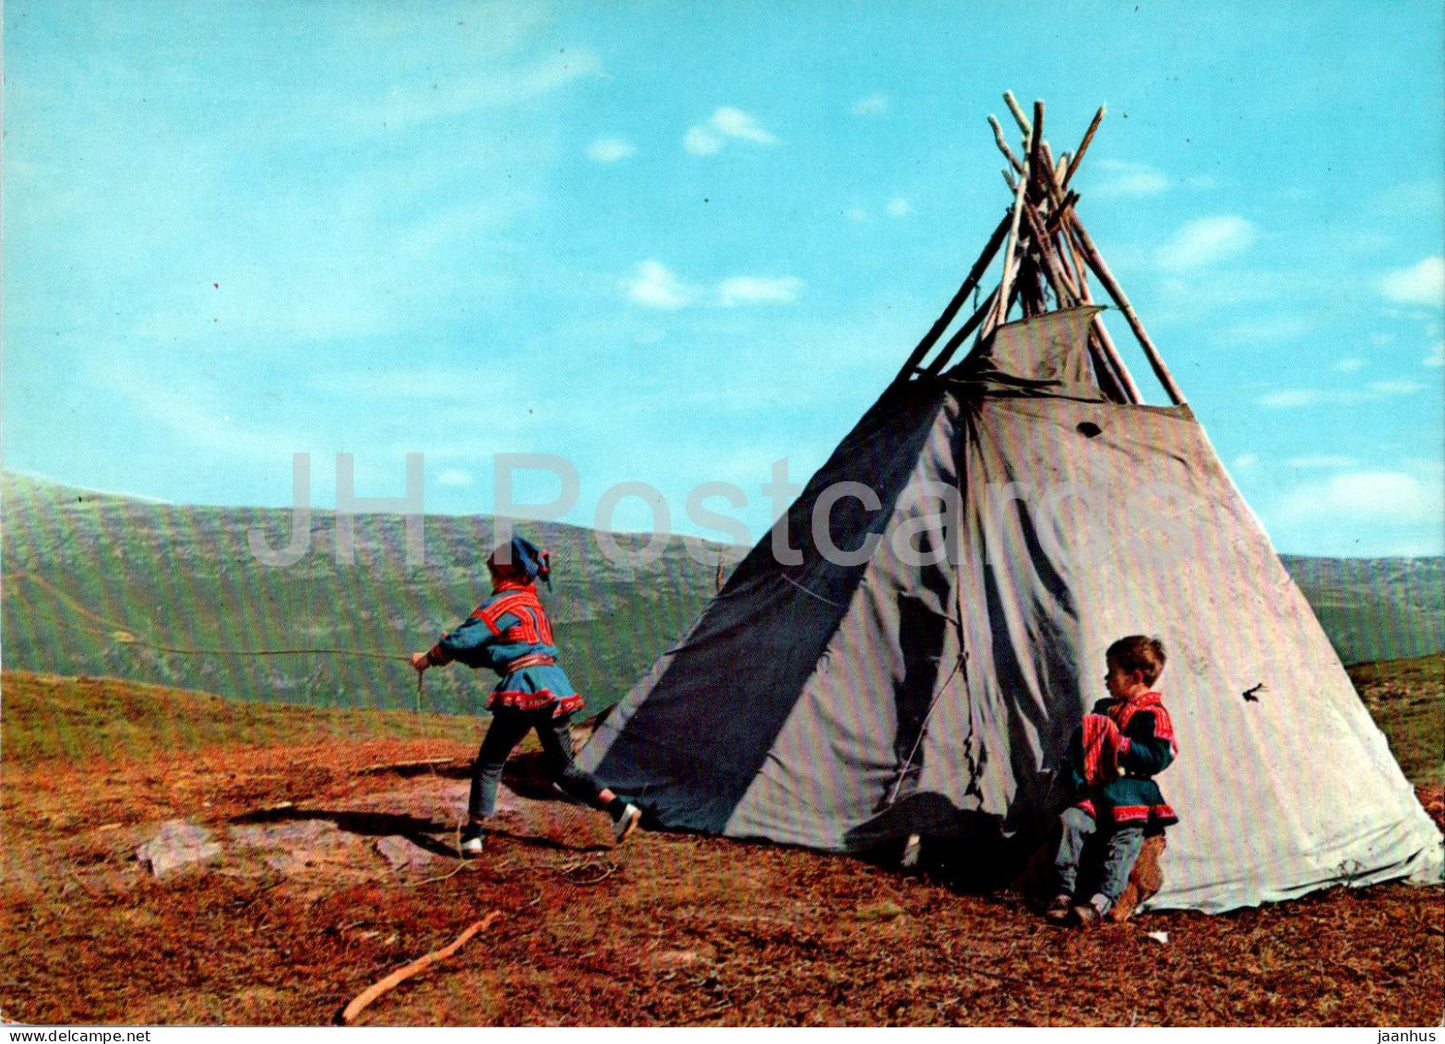 Lappboys playing - folk costume - 3469 - Norway - used - JH Postcards